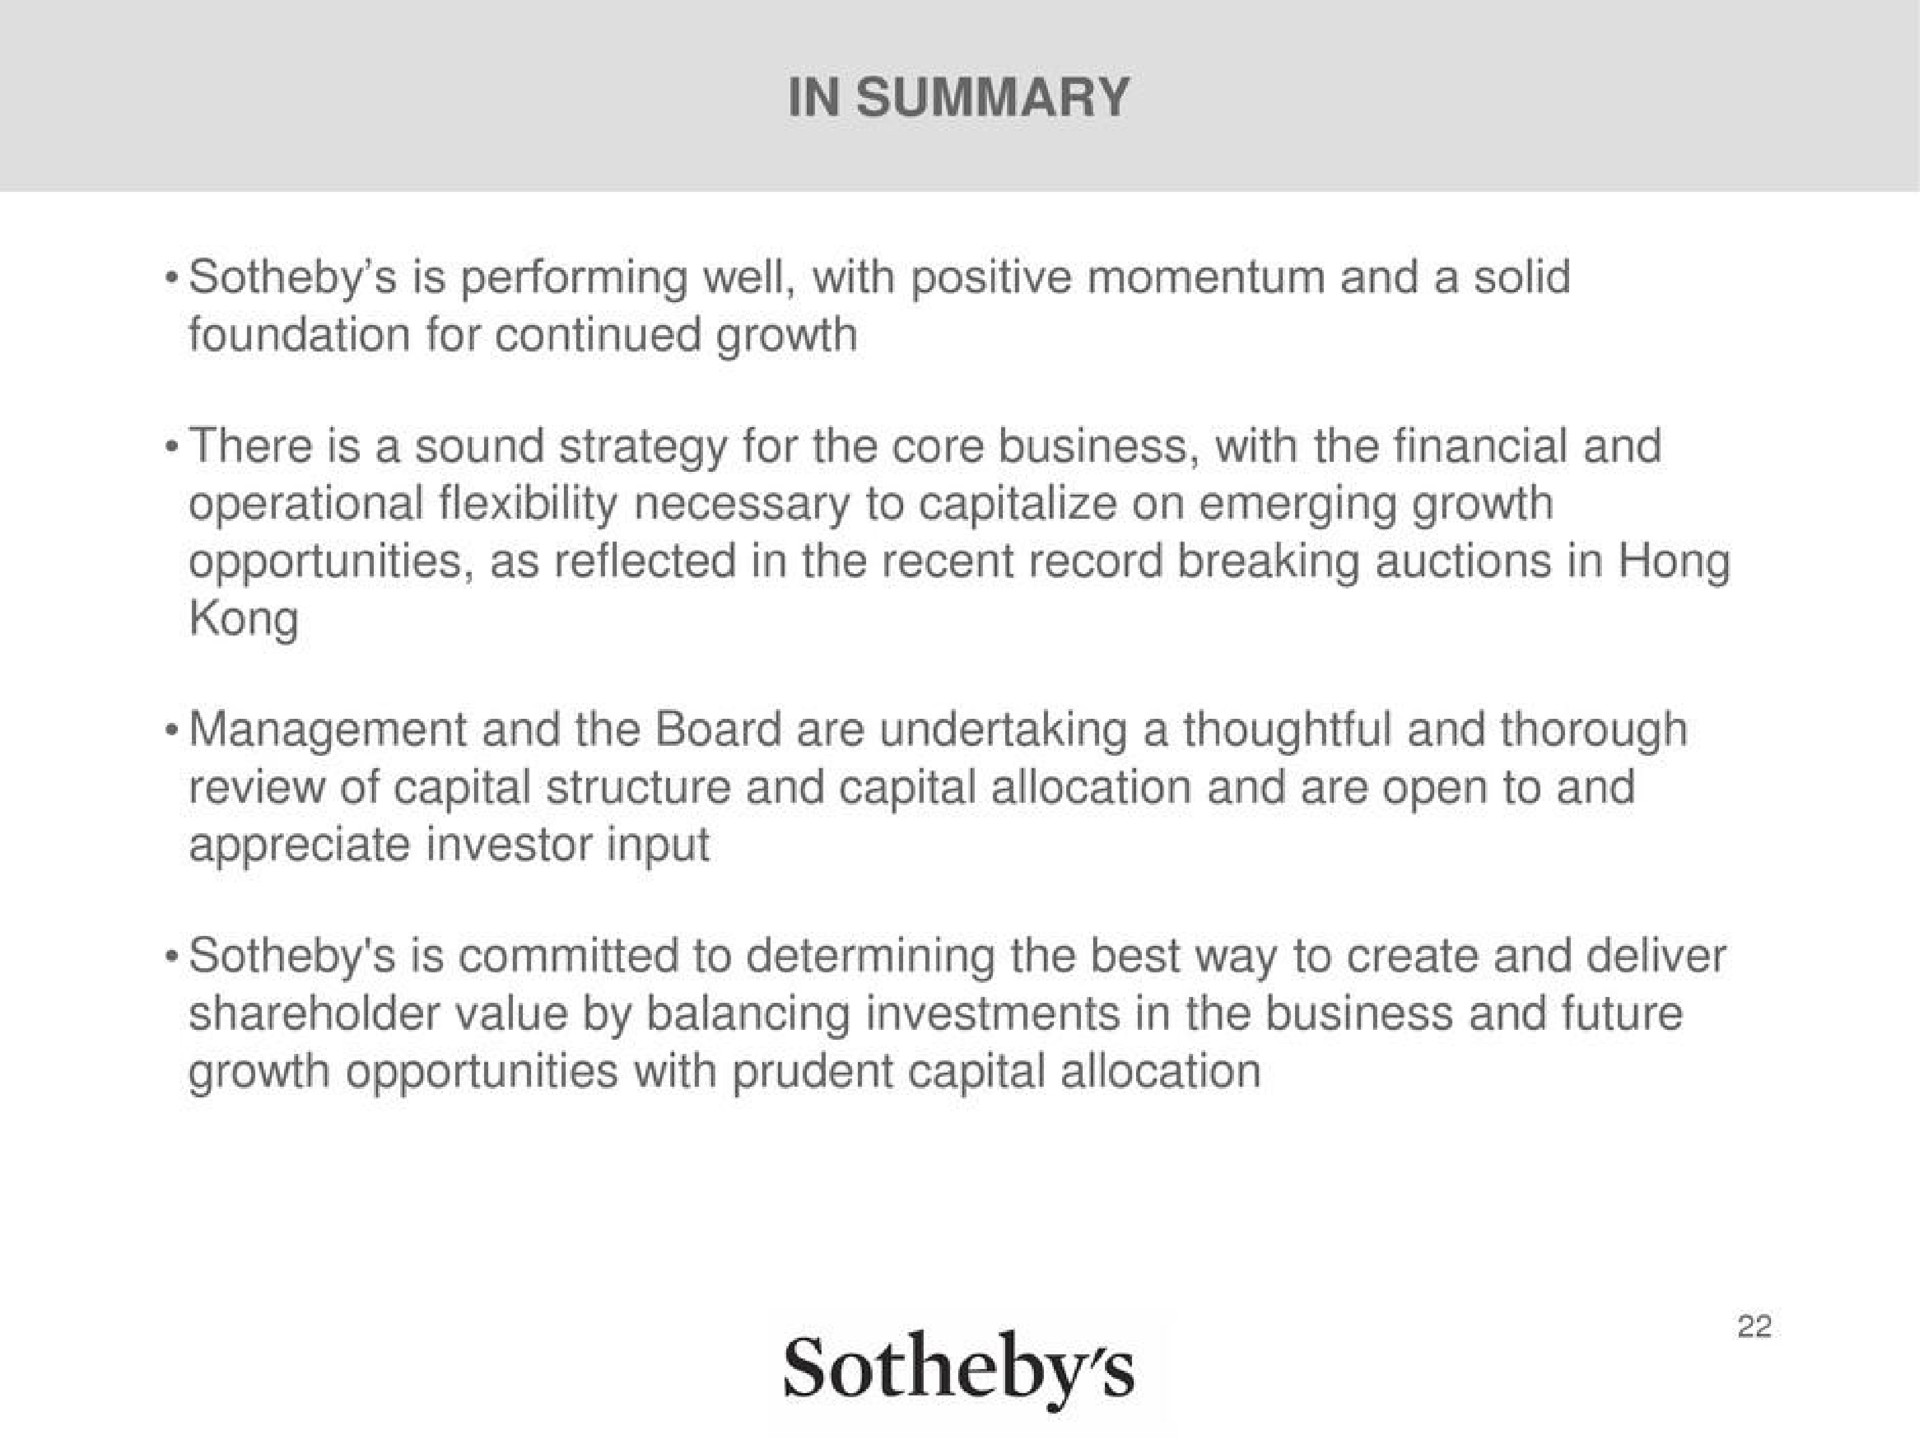 in summary is performing well with positive momentum and a solid foundation for continued growth there is a sound strategy for the core business with the financial and operational flexibility necessary to capitalize on emerging growth opportunities as reflected in the recent record breaking auctions in hong management and the board are undertaking a thoughtful and thorough review of capital structure and capital allocation and are open to and appreciate investor input is committed to determining the best way to create and deliver shareholder value by balancing investments in the business and future growth opportunities with prudent capital allocation | Sotheby's